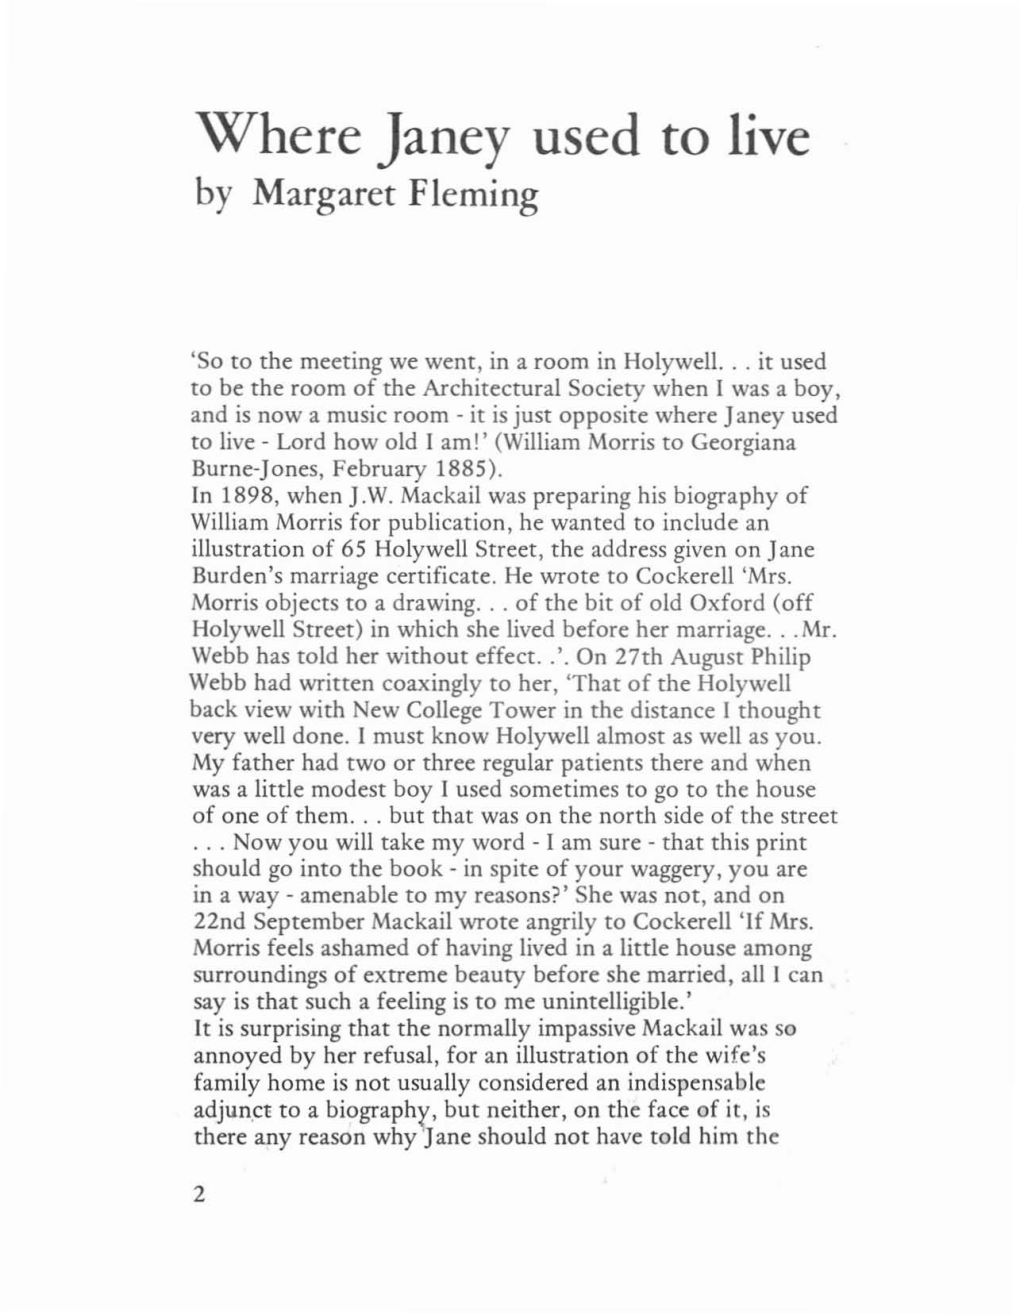 Where Janey Used to Live by Margaret Fleming